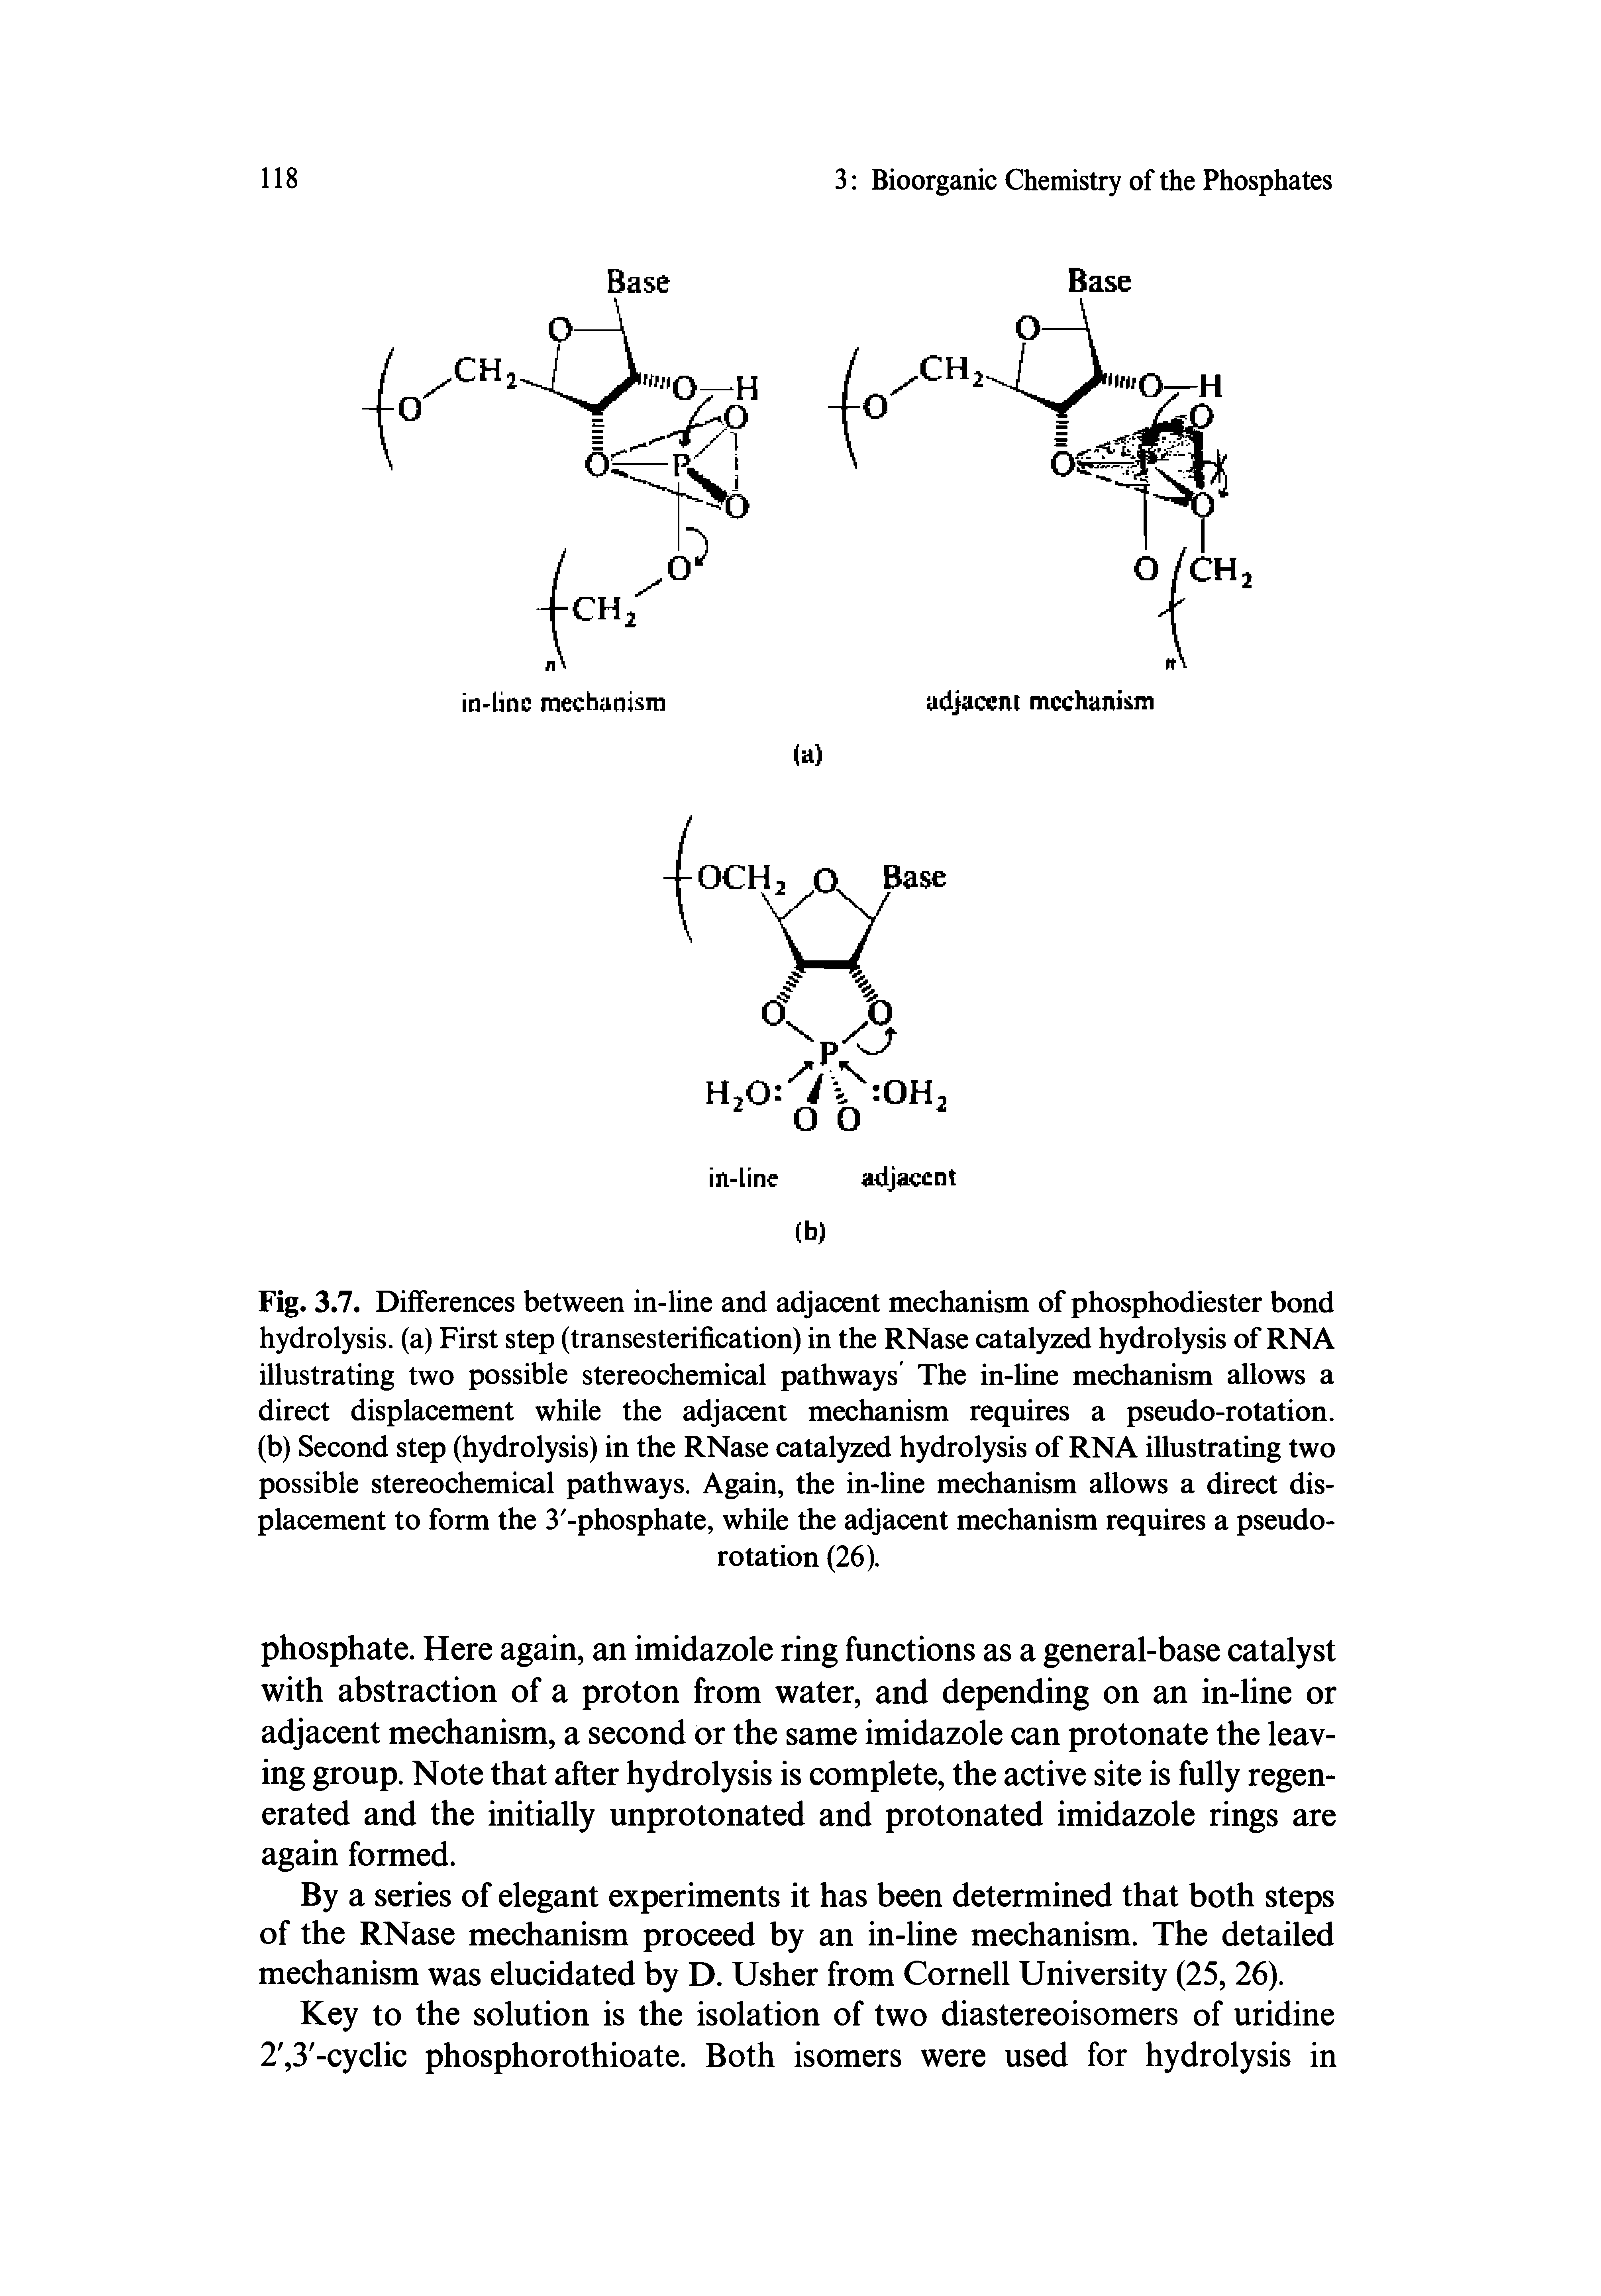 Fig. 3.7. Differences between in-line and adjacent mechanism of phosphodiester bond hydrolysis, (a) First step (transesterification) in the RNase catalyzed hydrolysis of RNA illustrating two possible stereochemical pathways The in-line mechanism allows a direct displacement while the adjacent mechanism requires a pseudo-rotation, (b) Second step (hydrolysis) in the RNase catalyzed hydrolysis of RNA illustrating two possible stereochemical pathways. Again, the in-line mechanism allows a direct displacement to form the 3 -phosphate, while the adjacent mechanism requires a pseudorotation (26).